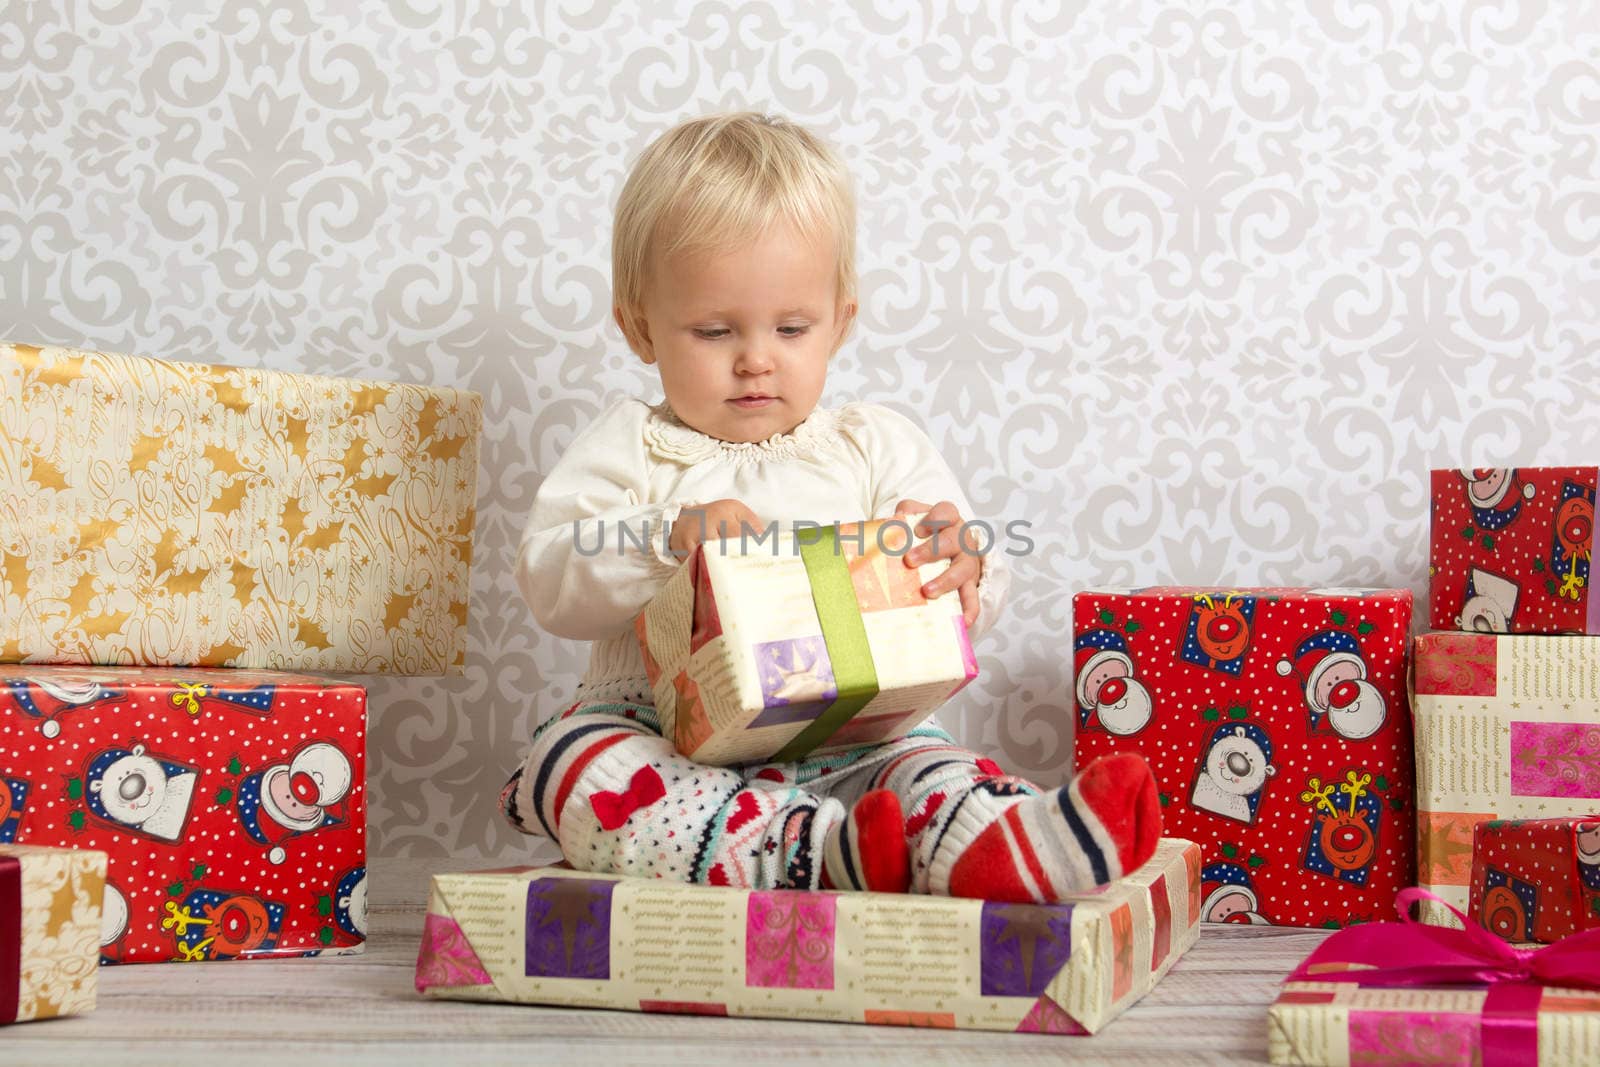 An adorable baby girl concentrate when holding a wrapped Christmas gift